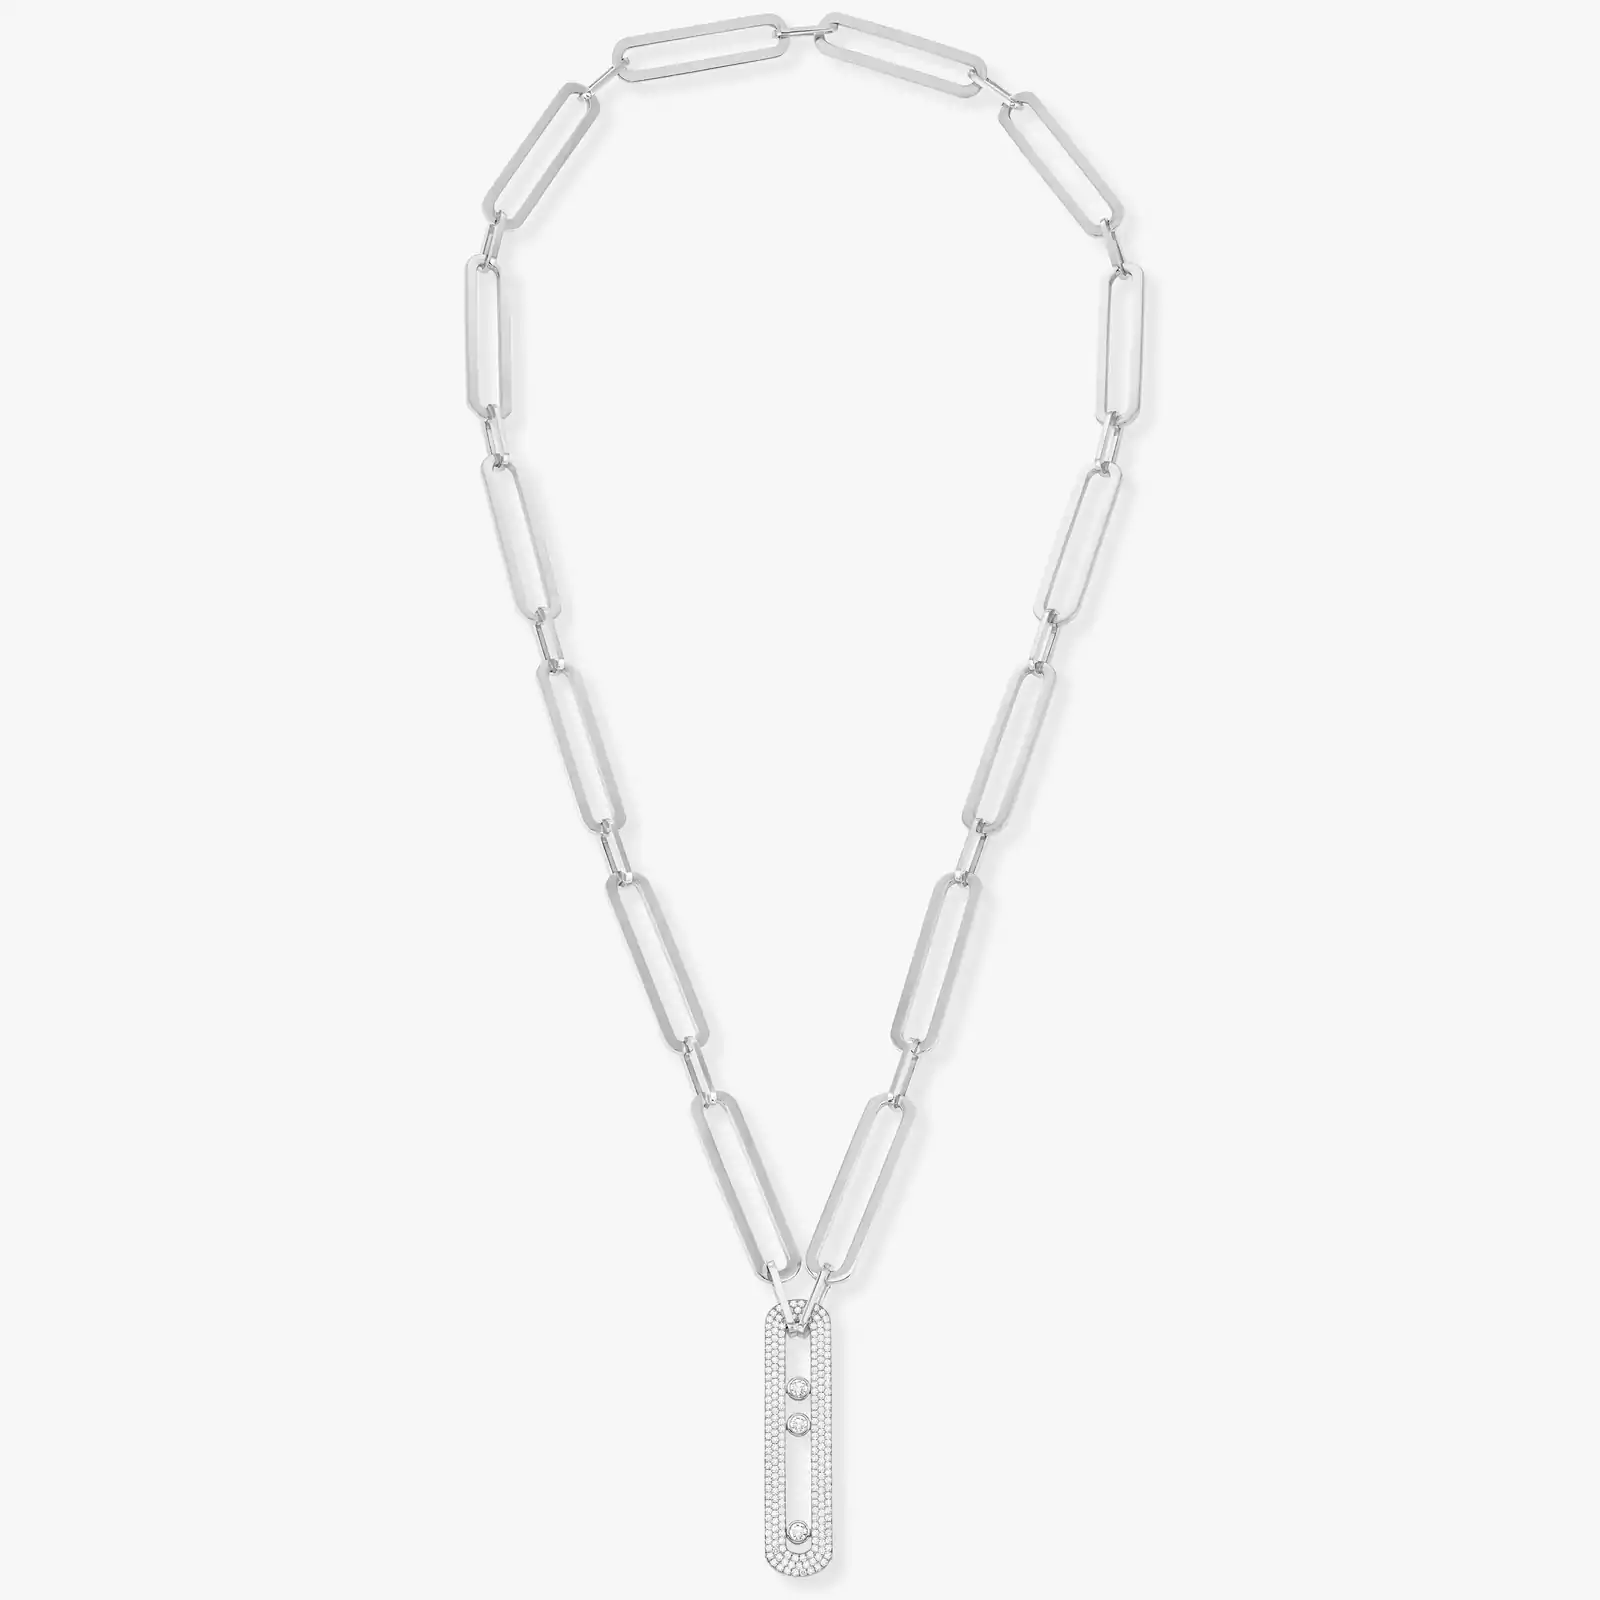 Move 10th Anniversary XL White Gold For Her Diamond Necklace 06768-WG